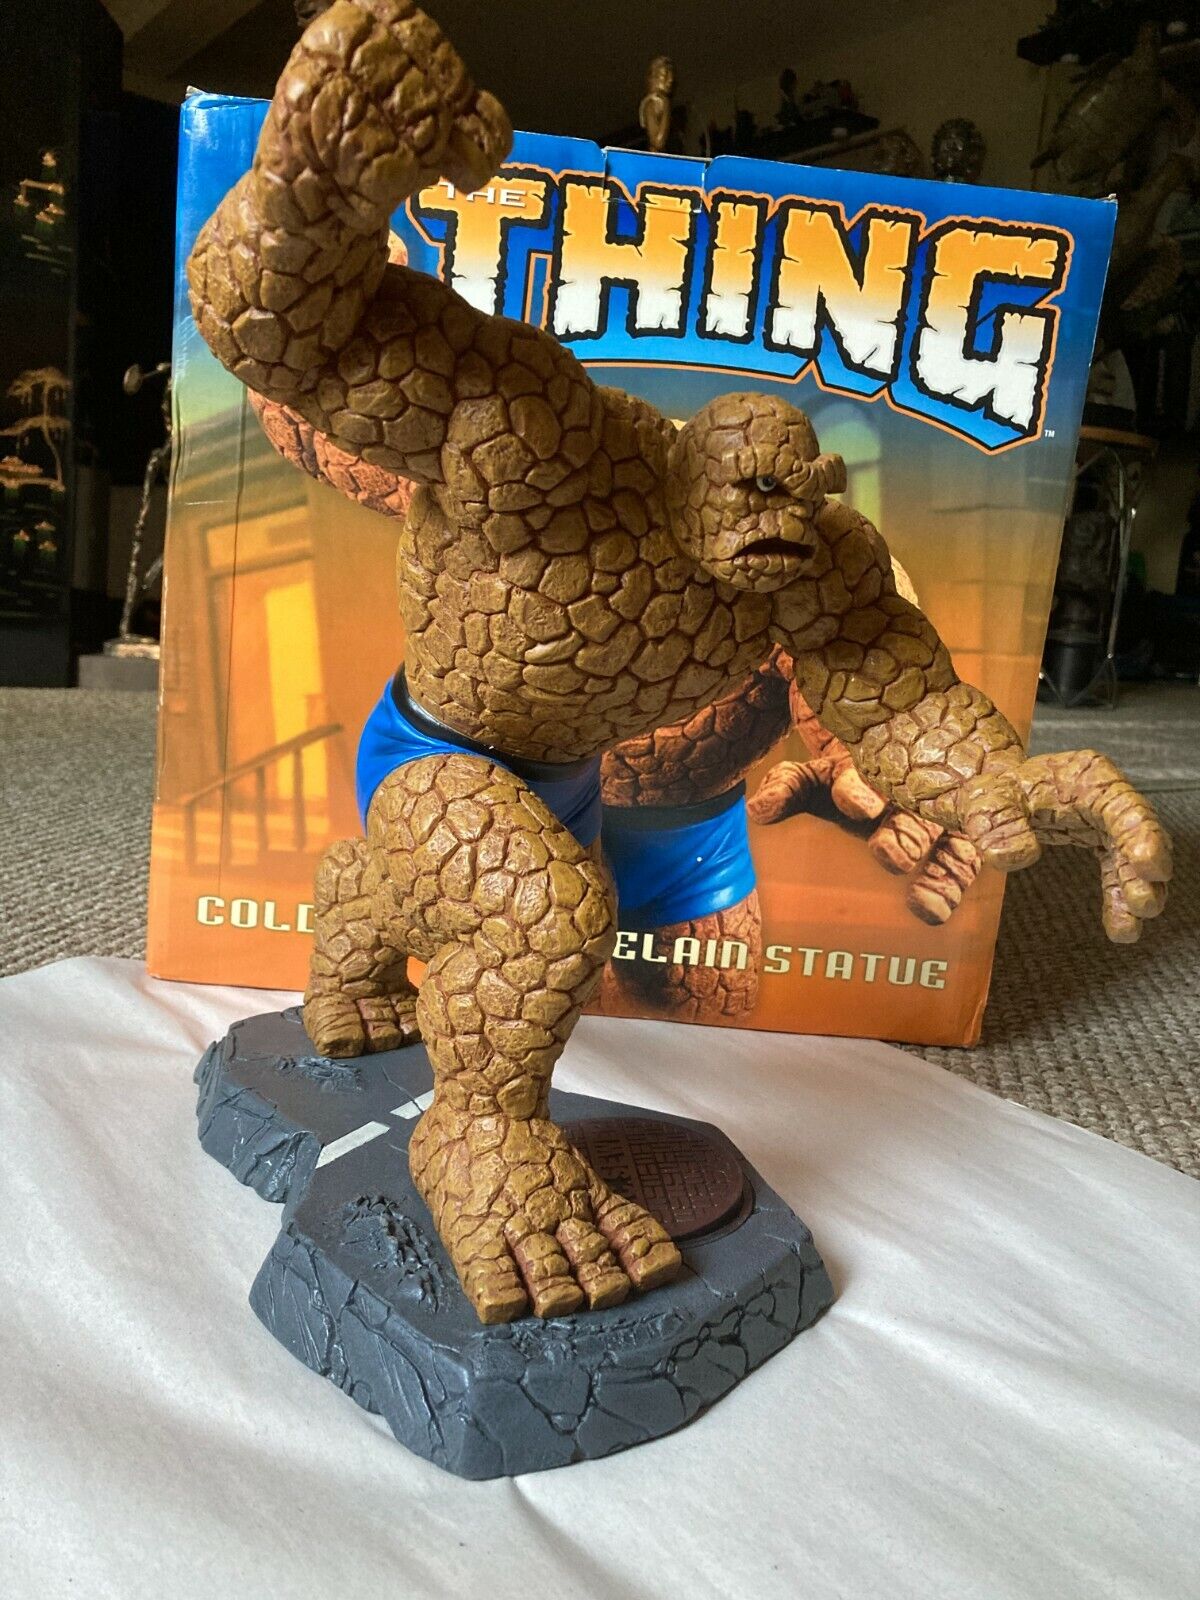 LARGE MARVEL'S THE THING HARD HERO STATUE WITH BOX- FANTASTIC SCULPT LIMITED 